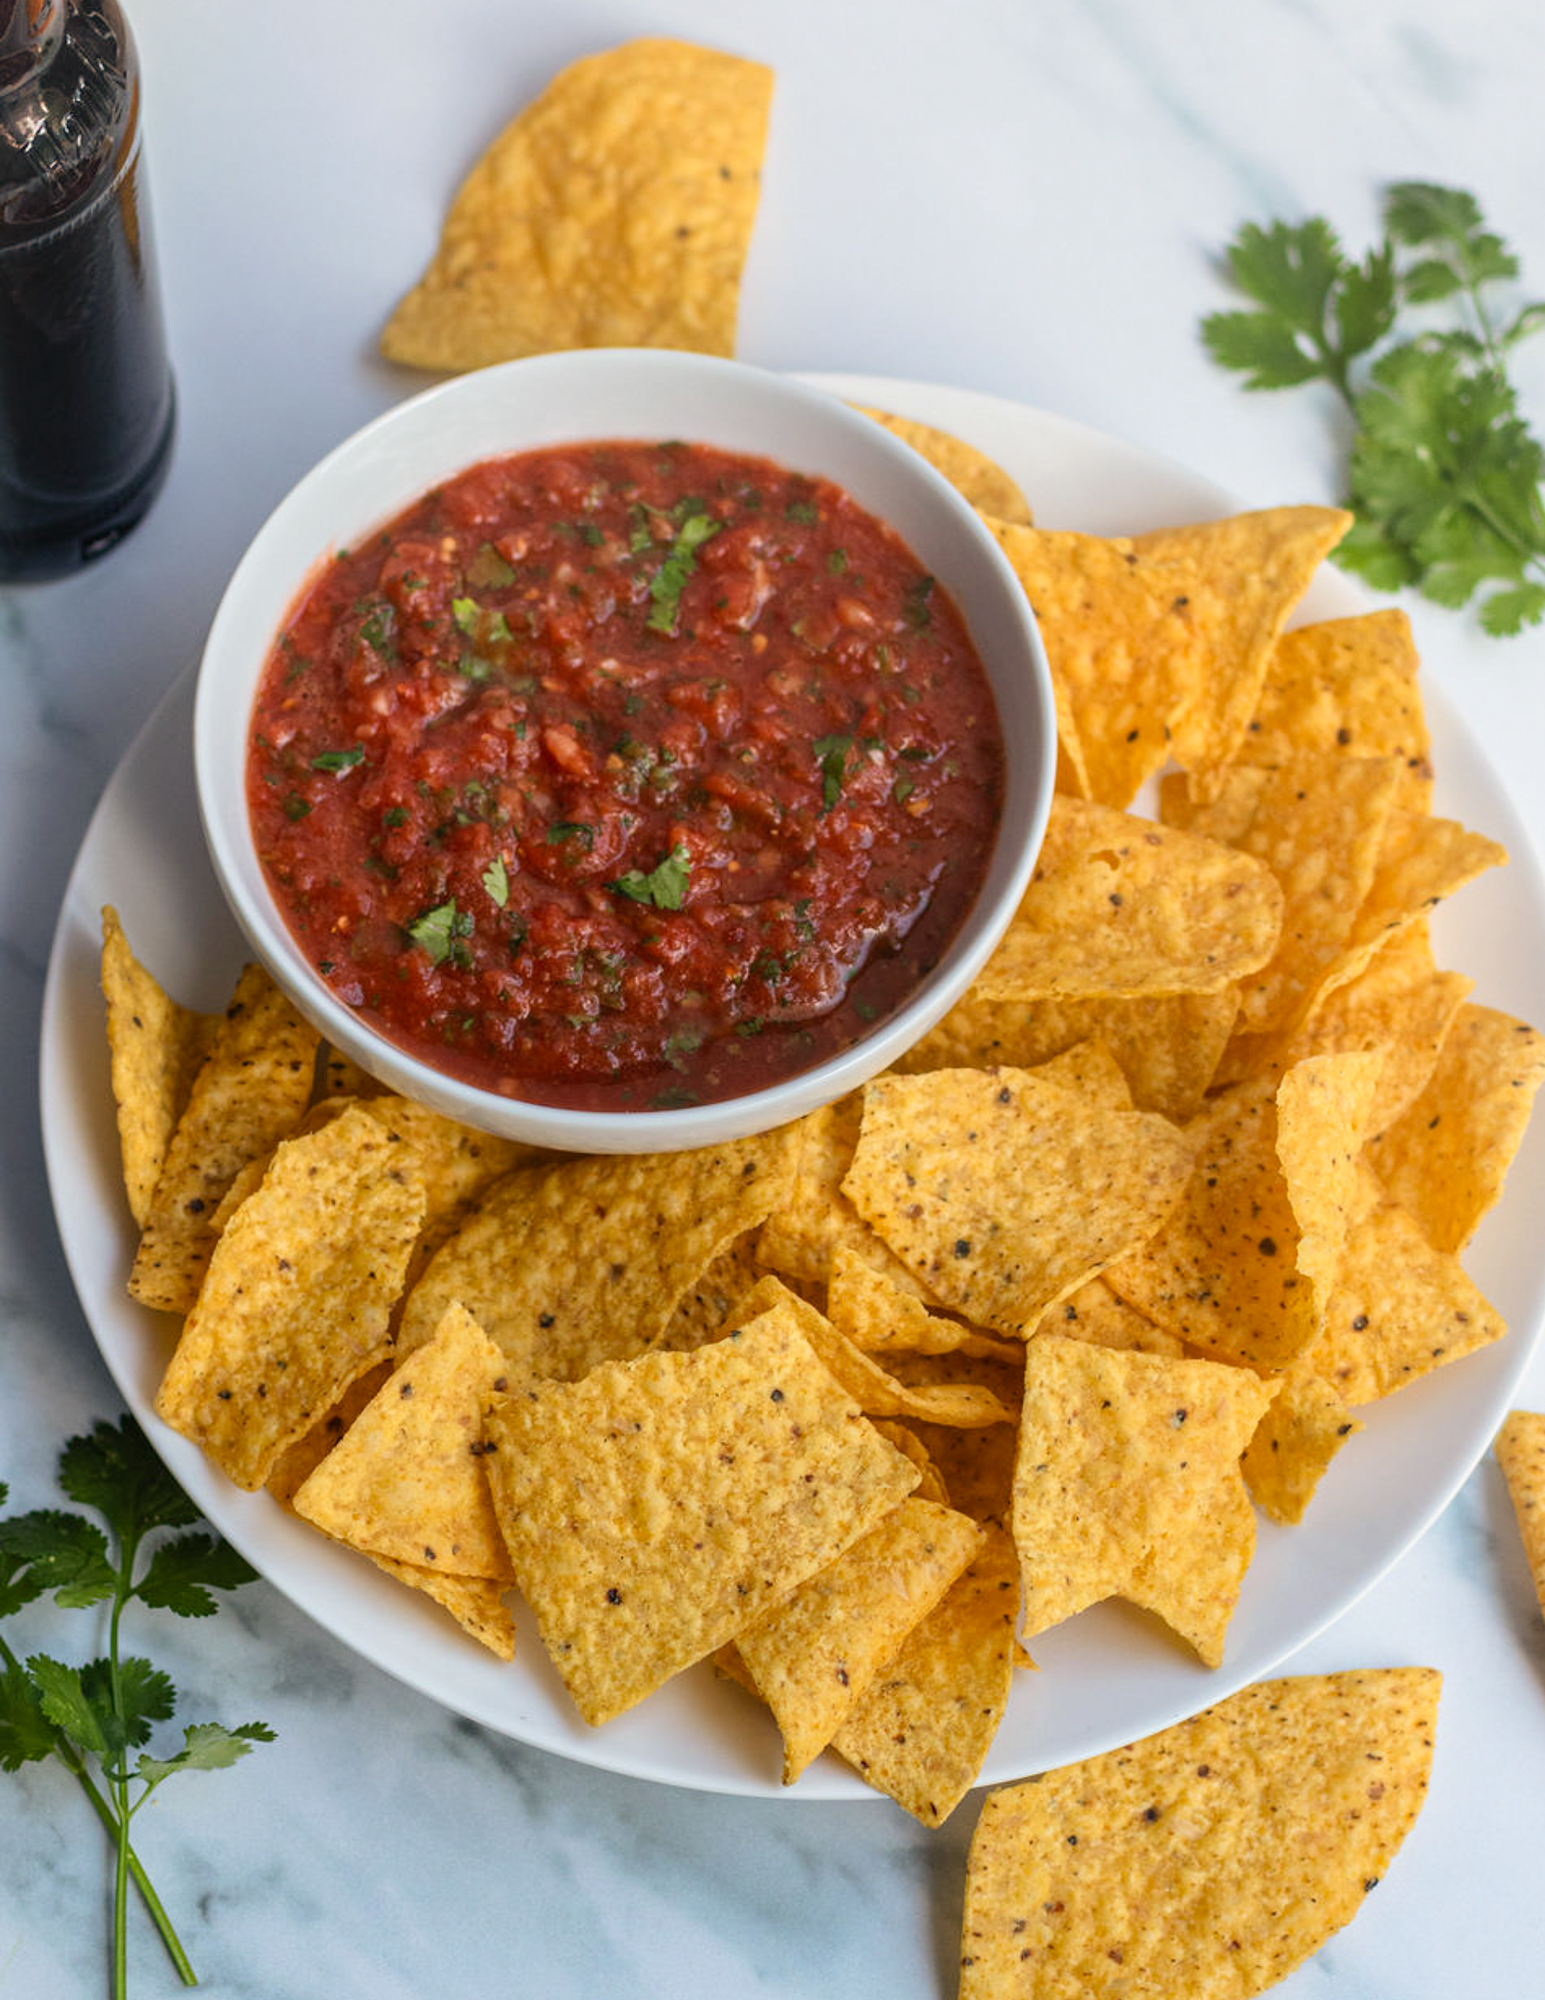 10 Minute Quick & Delicious Blender Salsa to Enjoy Anytime